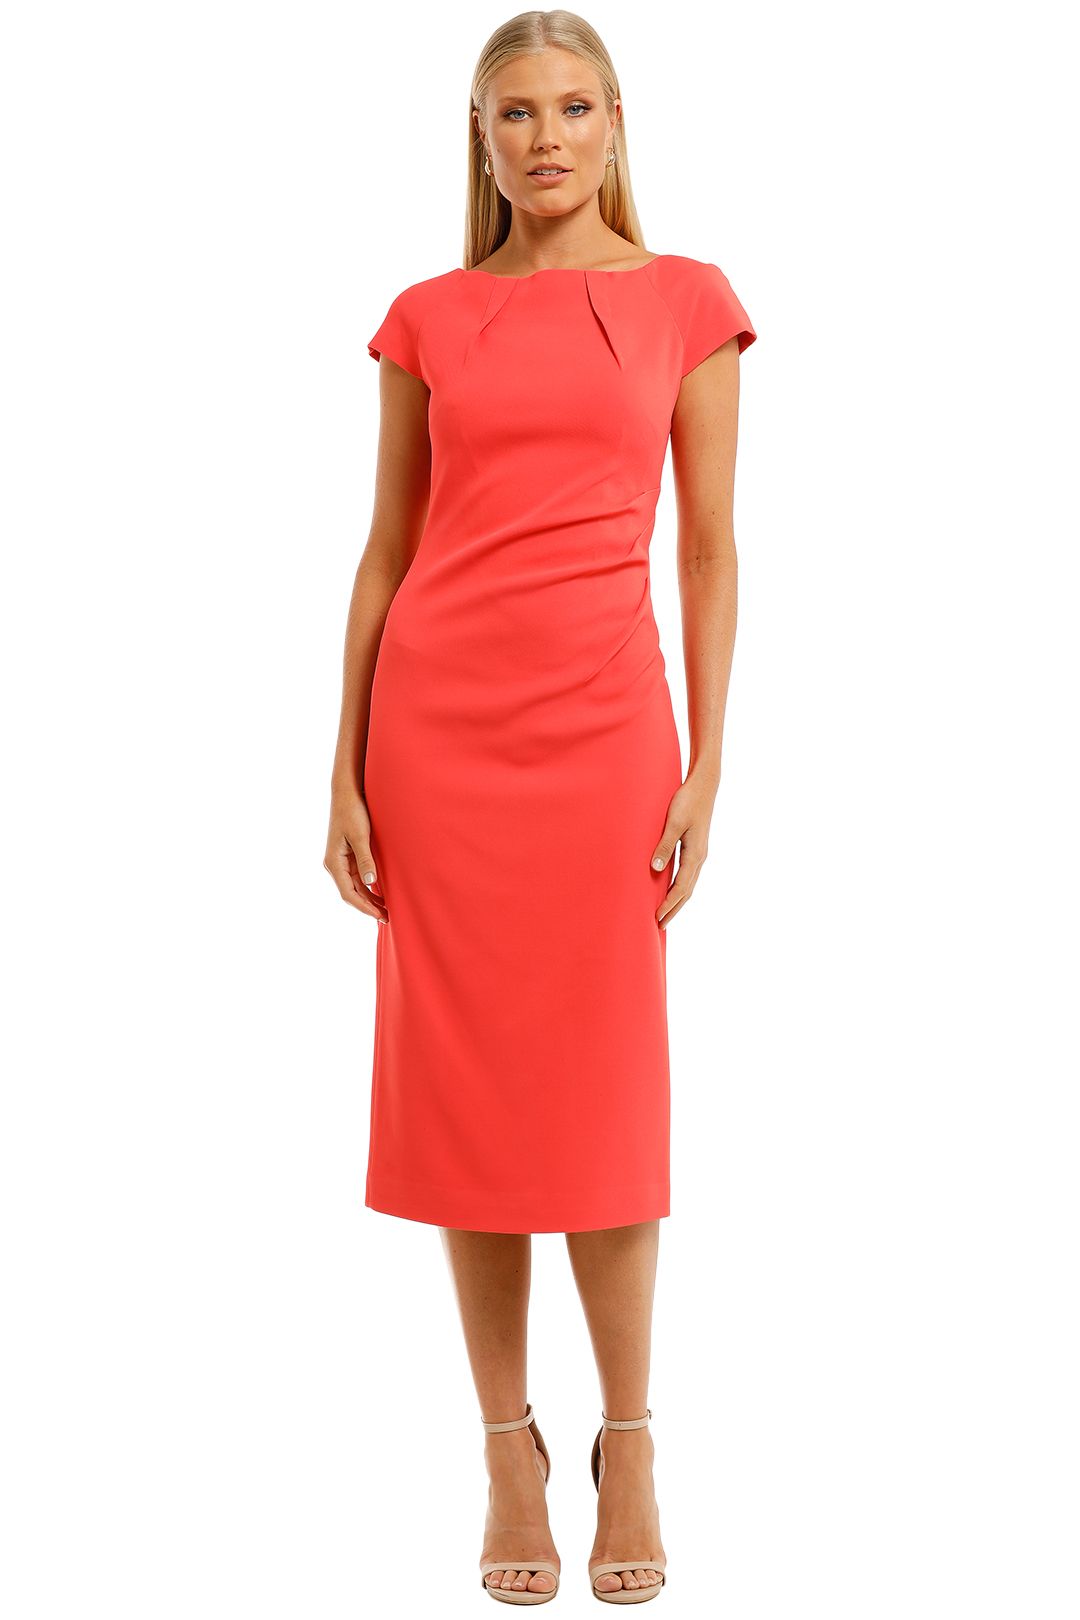 Ginger-and-Smart-Prospective-Dress-Watermelon-Front